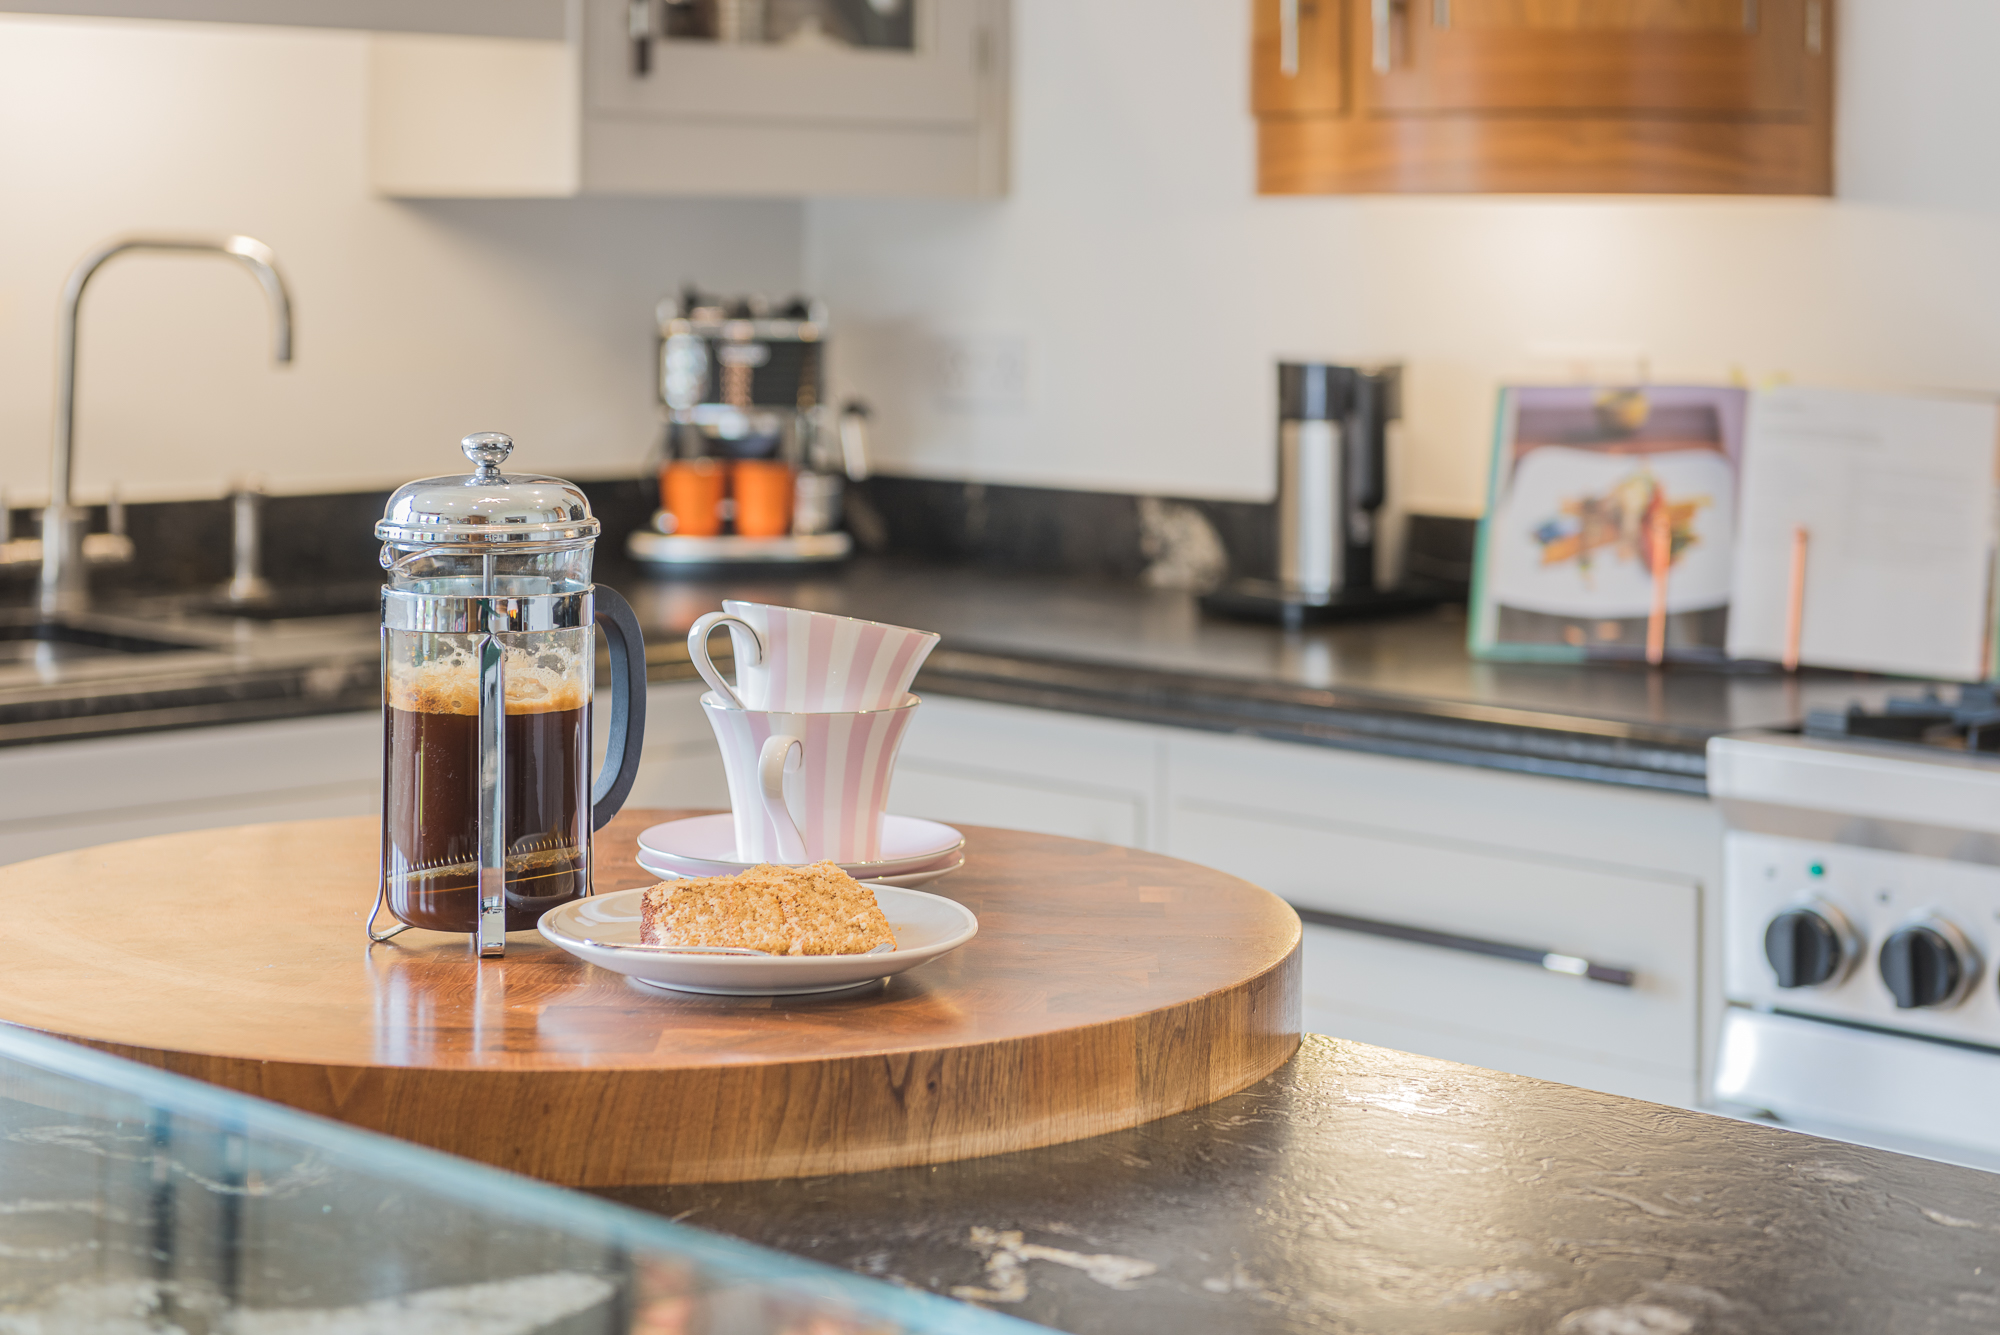 Stage your kitchen with coffee